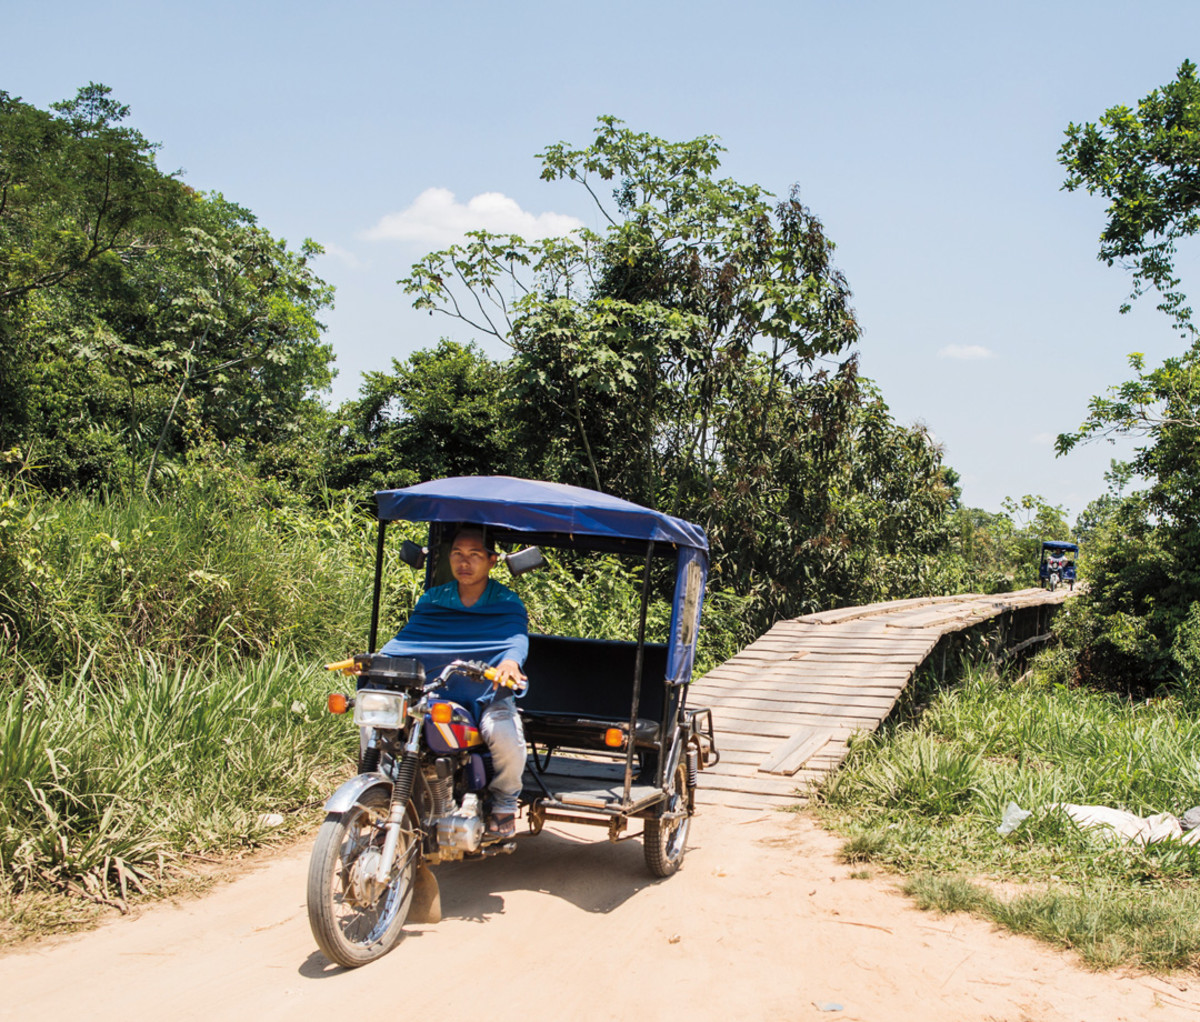 The Shipibo-Conibo village of Victoria Gracia, in the remote Ucayali region of northeastern Peru, is about an hour from the nearest city by rickshaw.